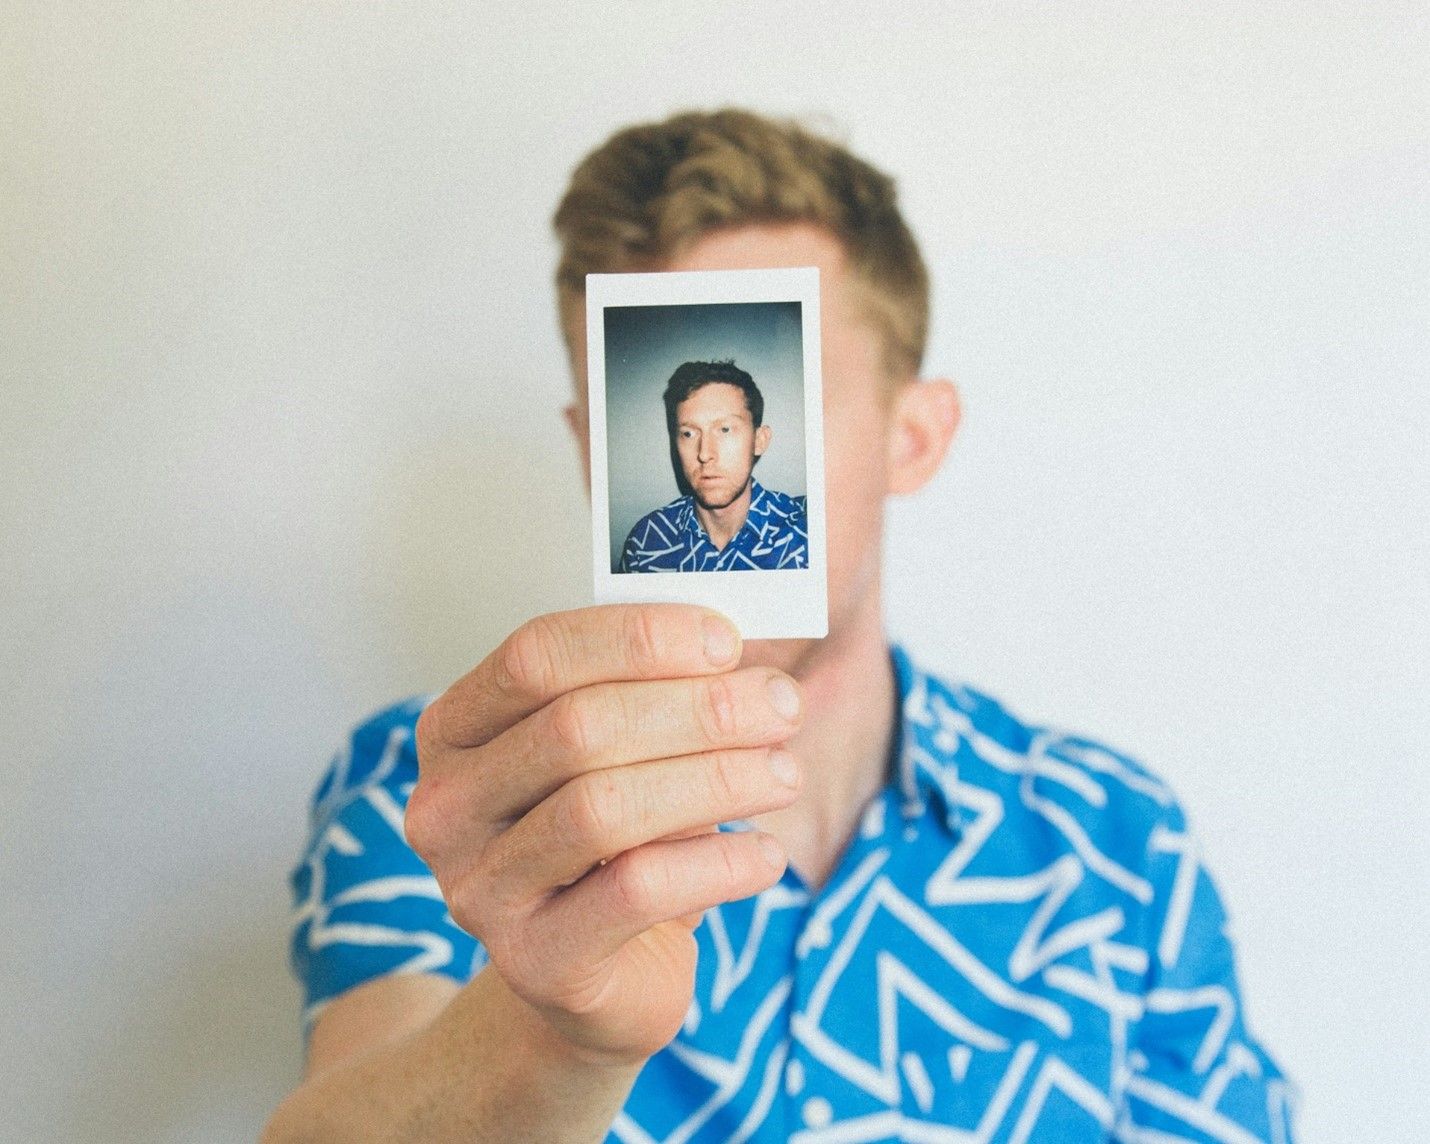 A man in a blue shirt is holding a polaroid picture in front of his face.